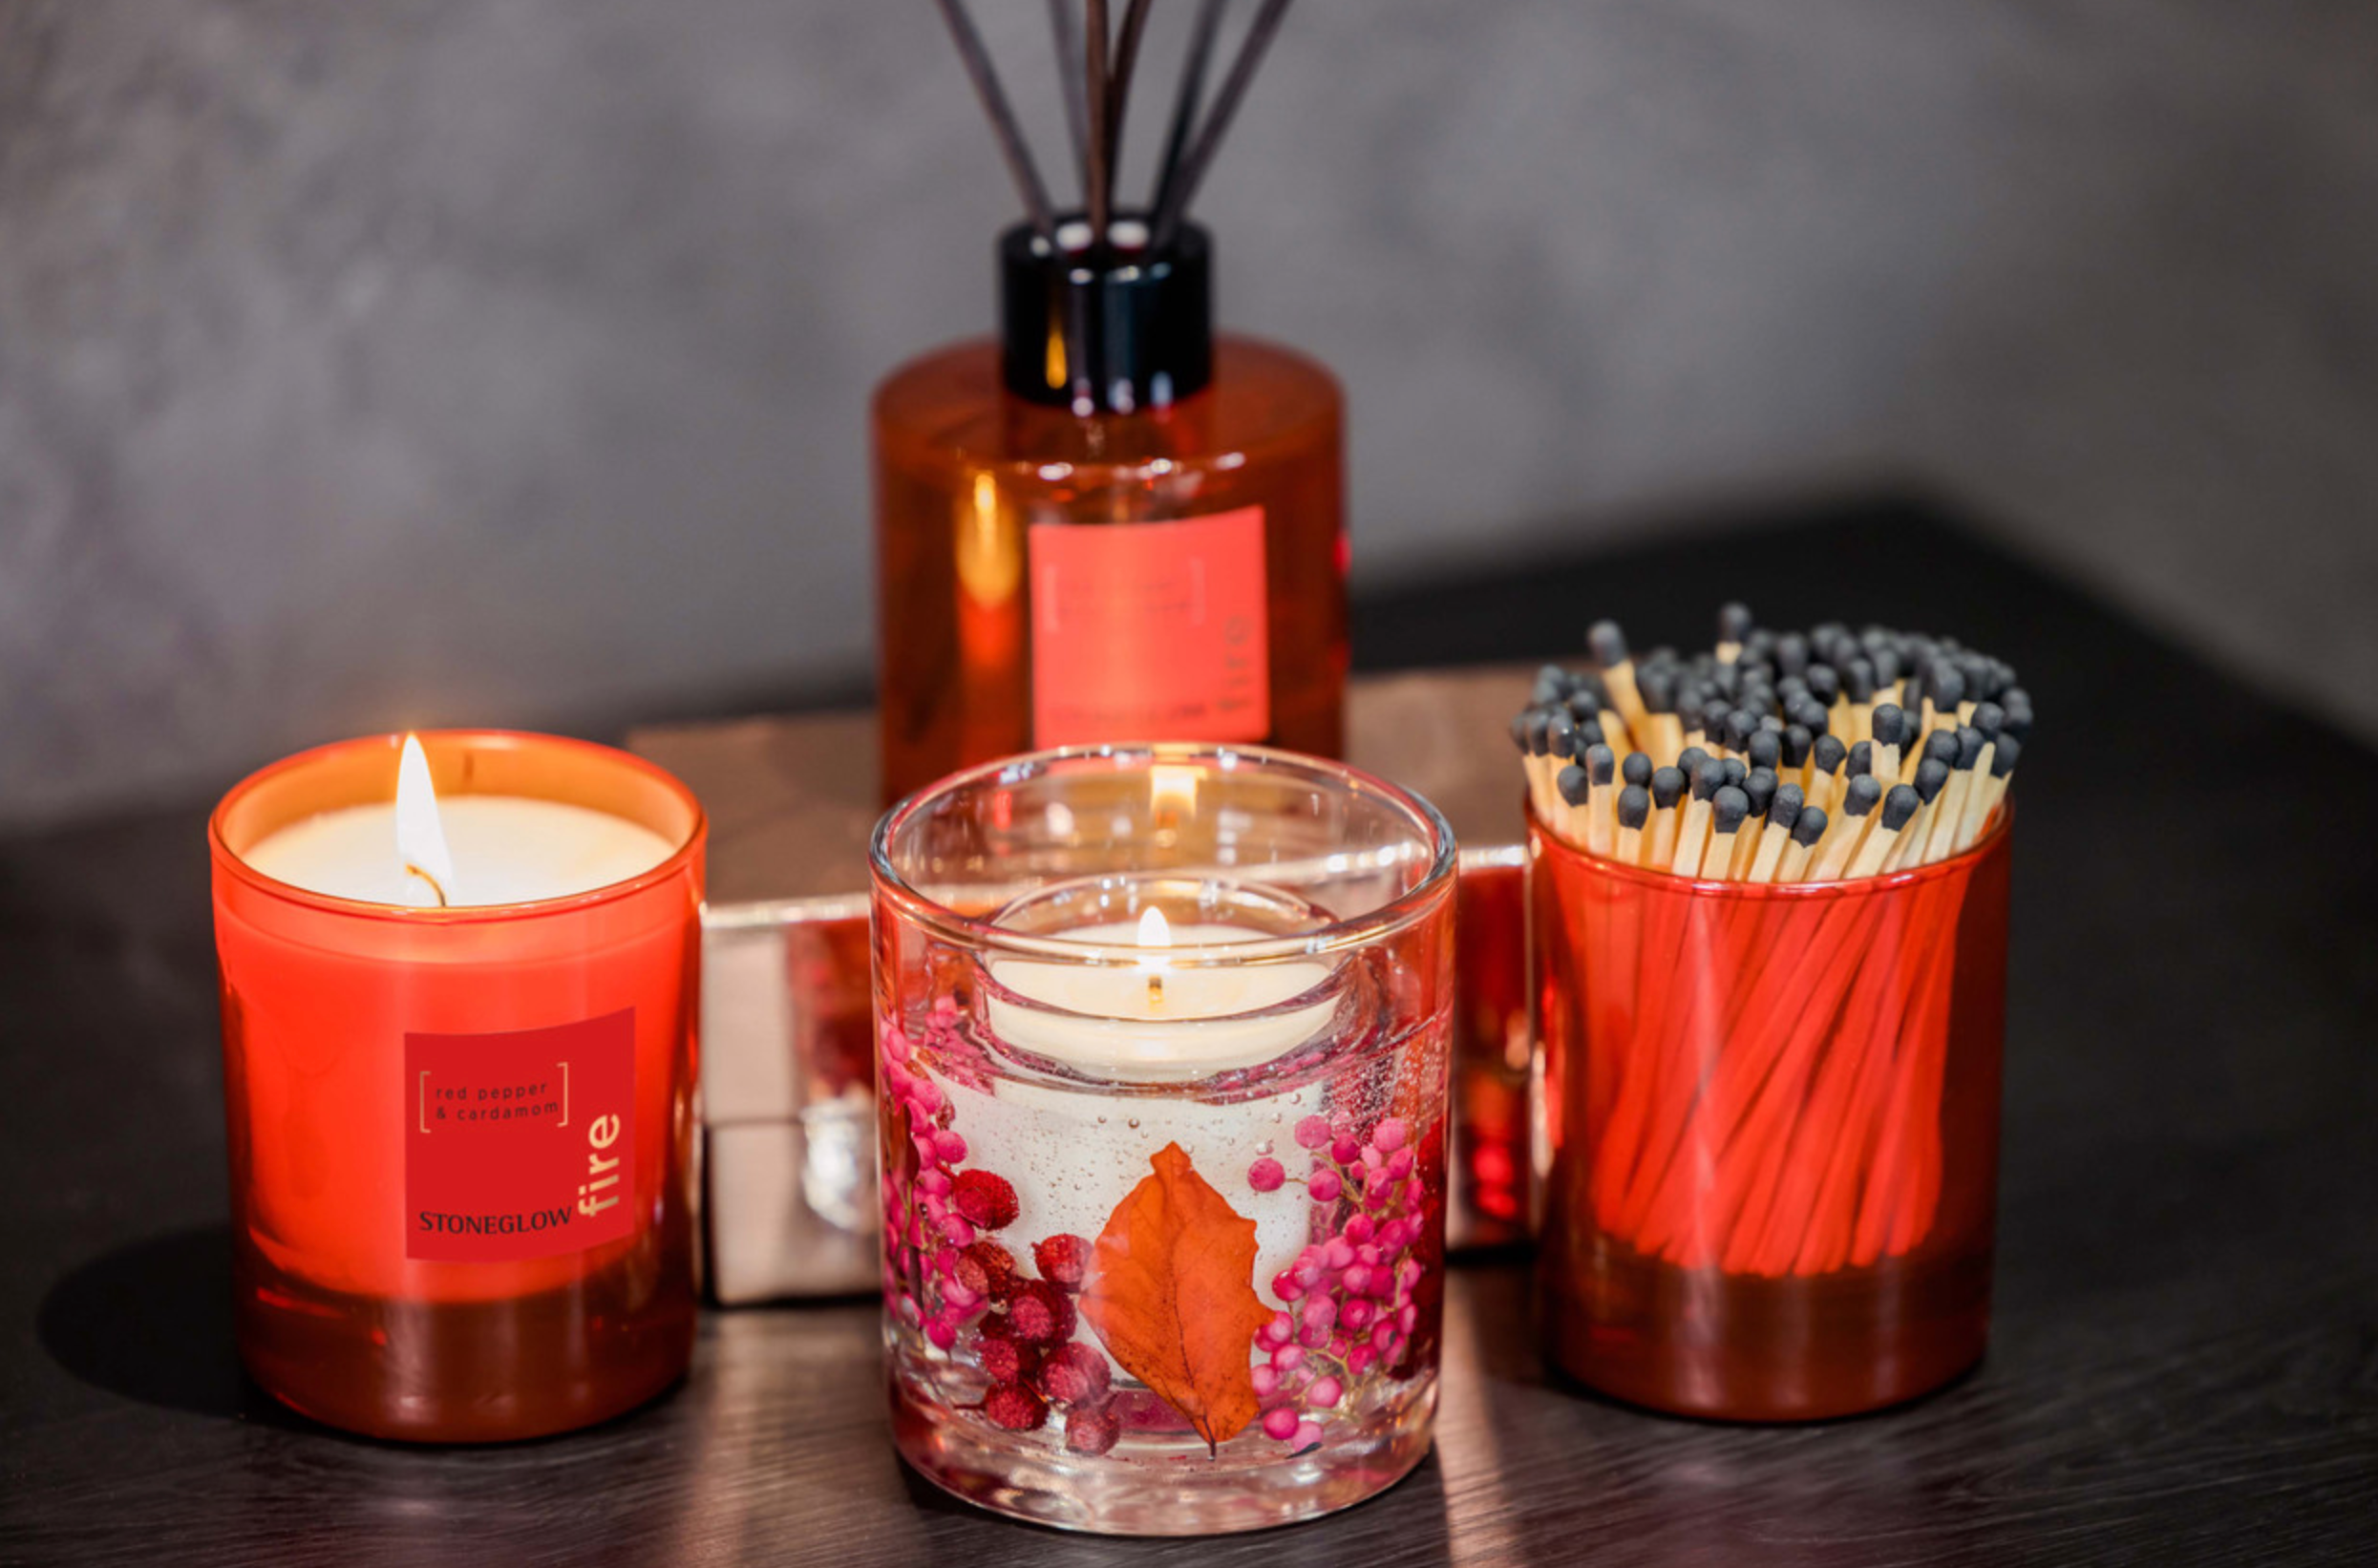 Elements Fire: Red pepper and Cardamom scented candle